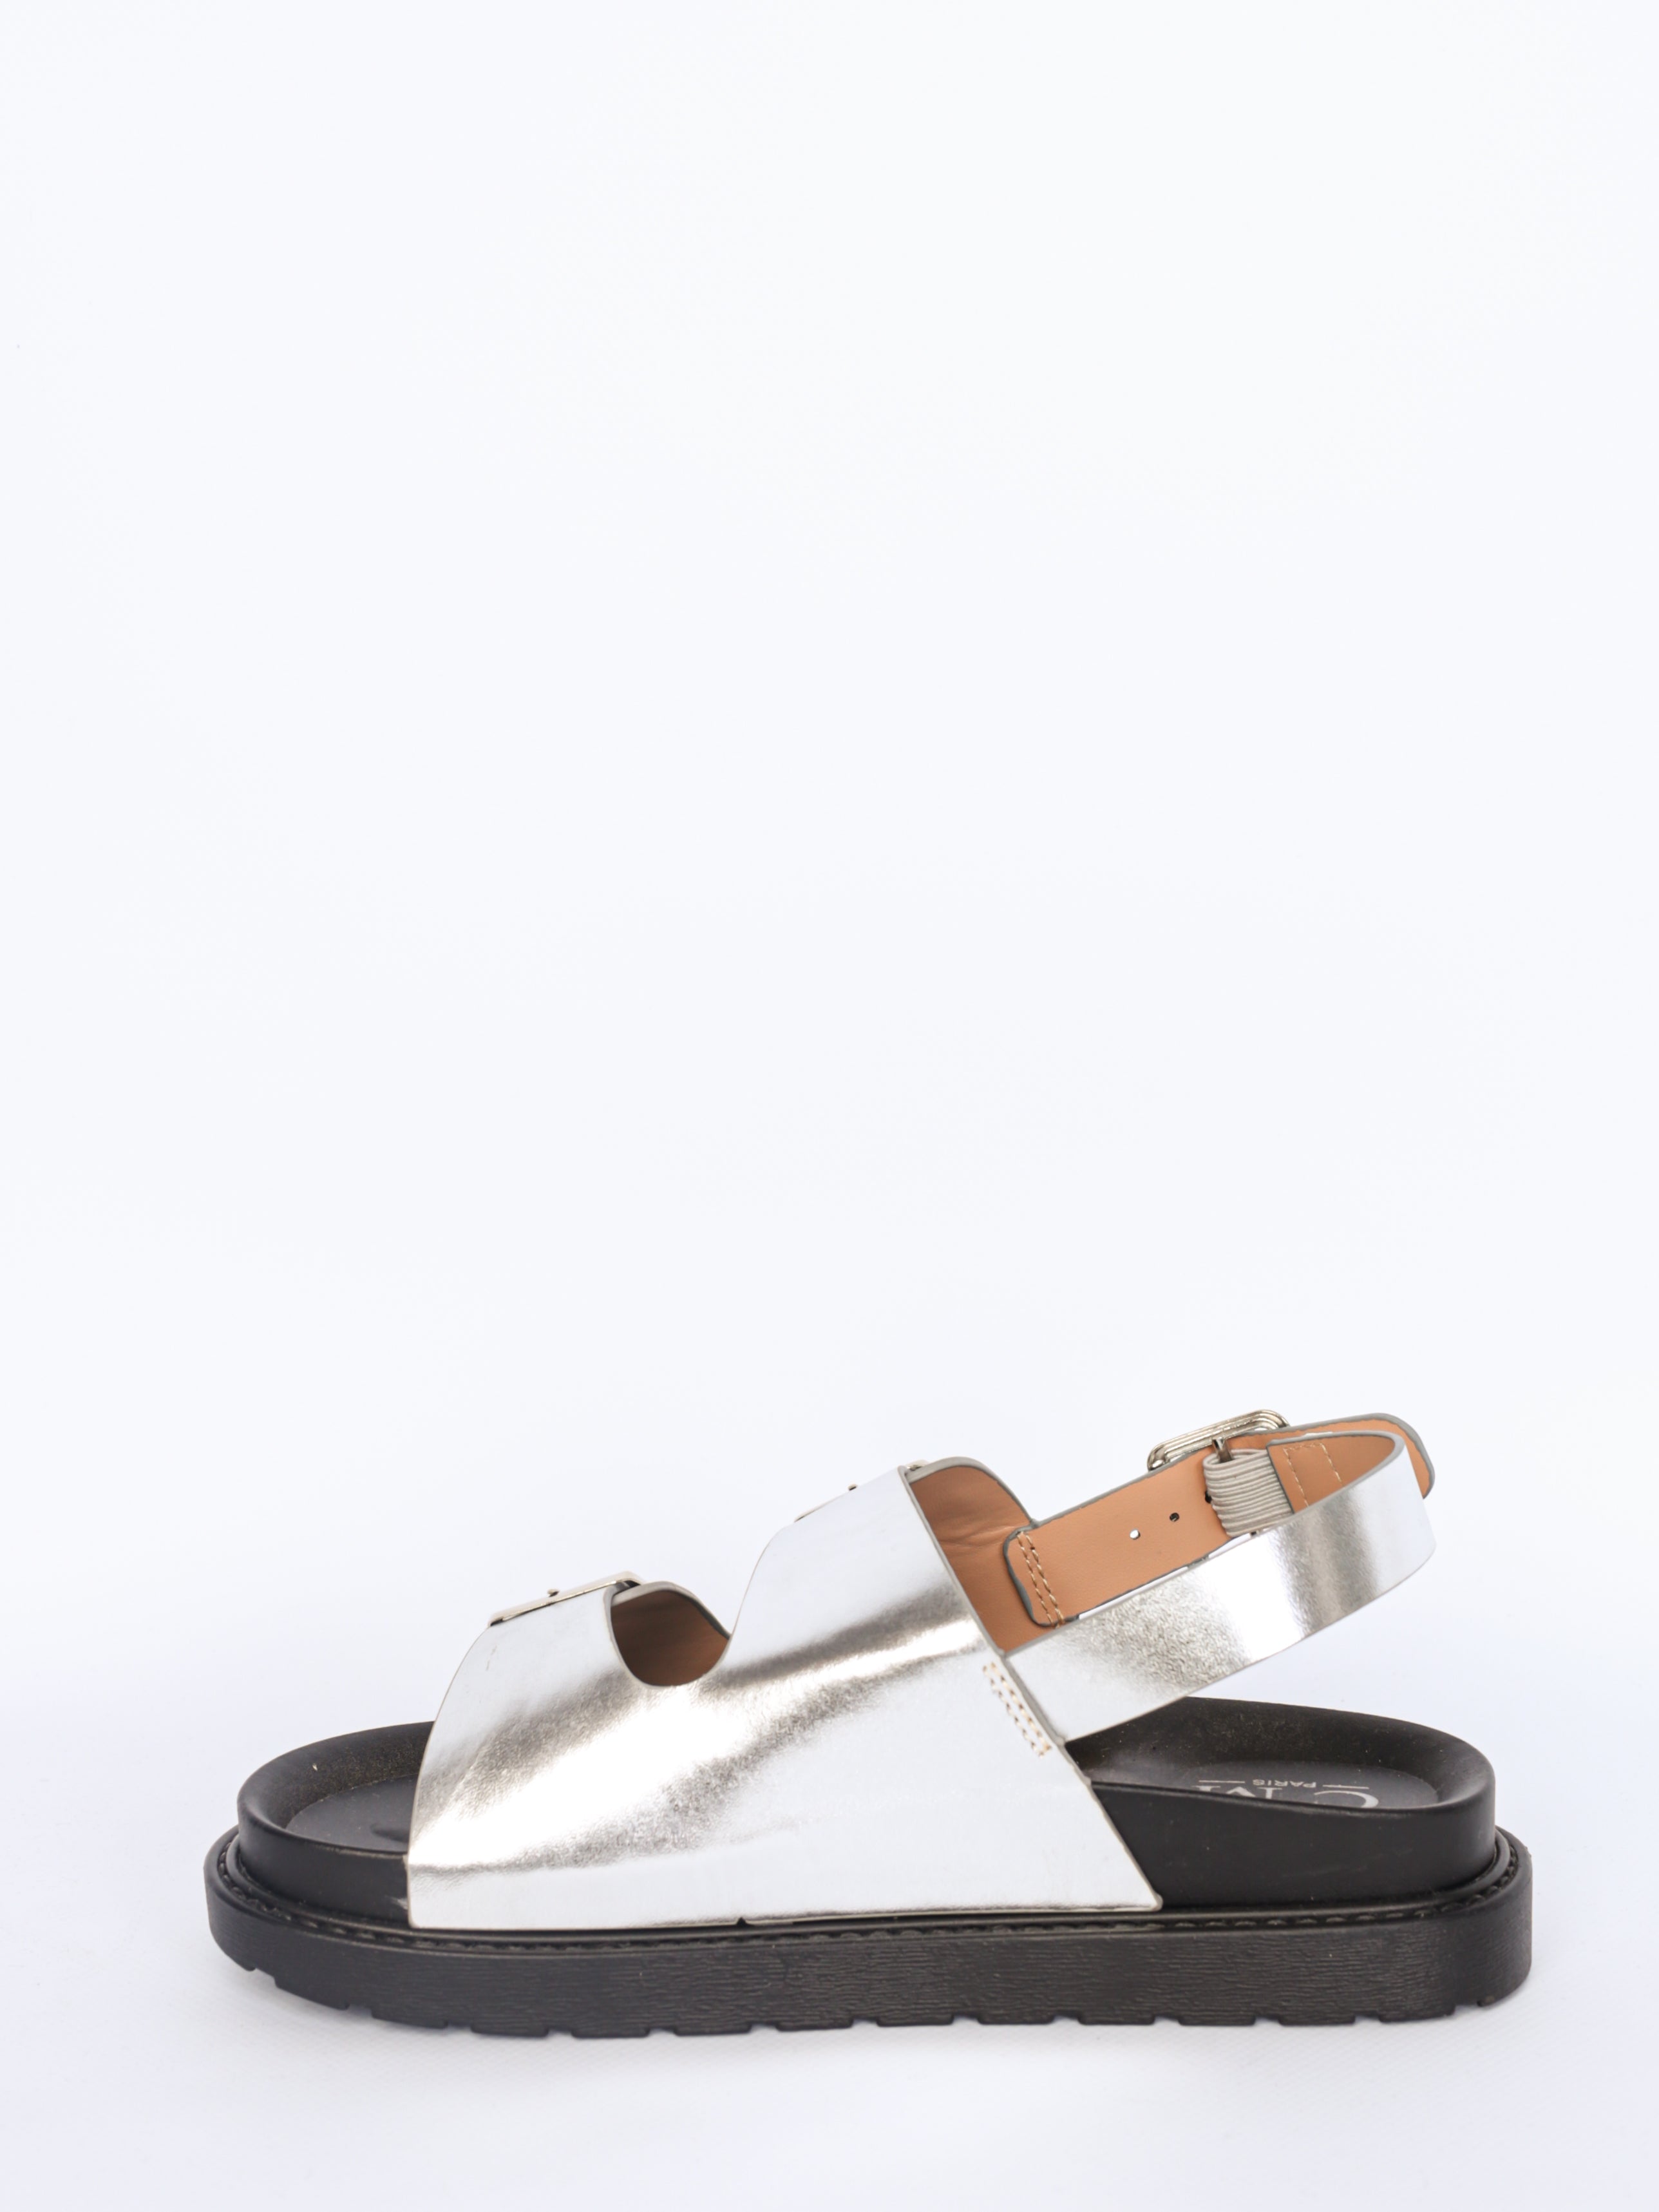 Sandals with buckles and strap